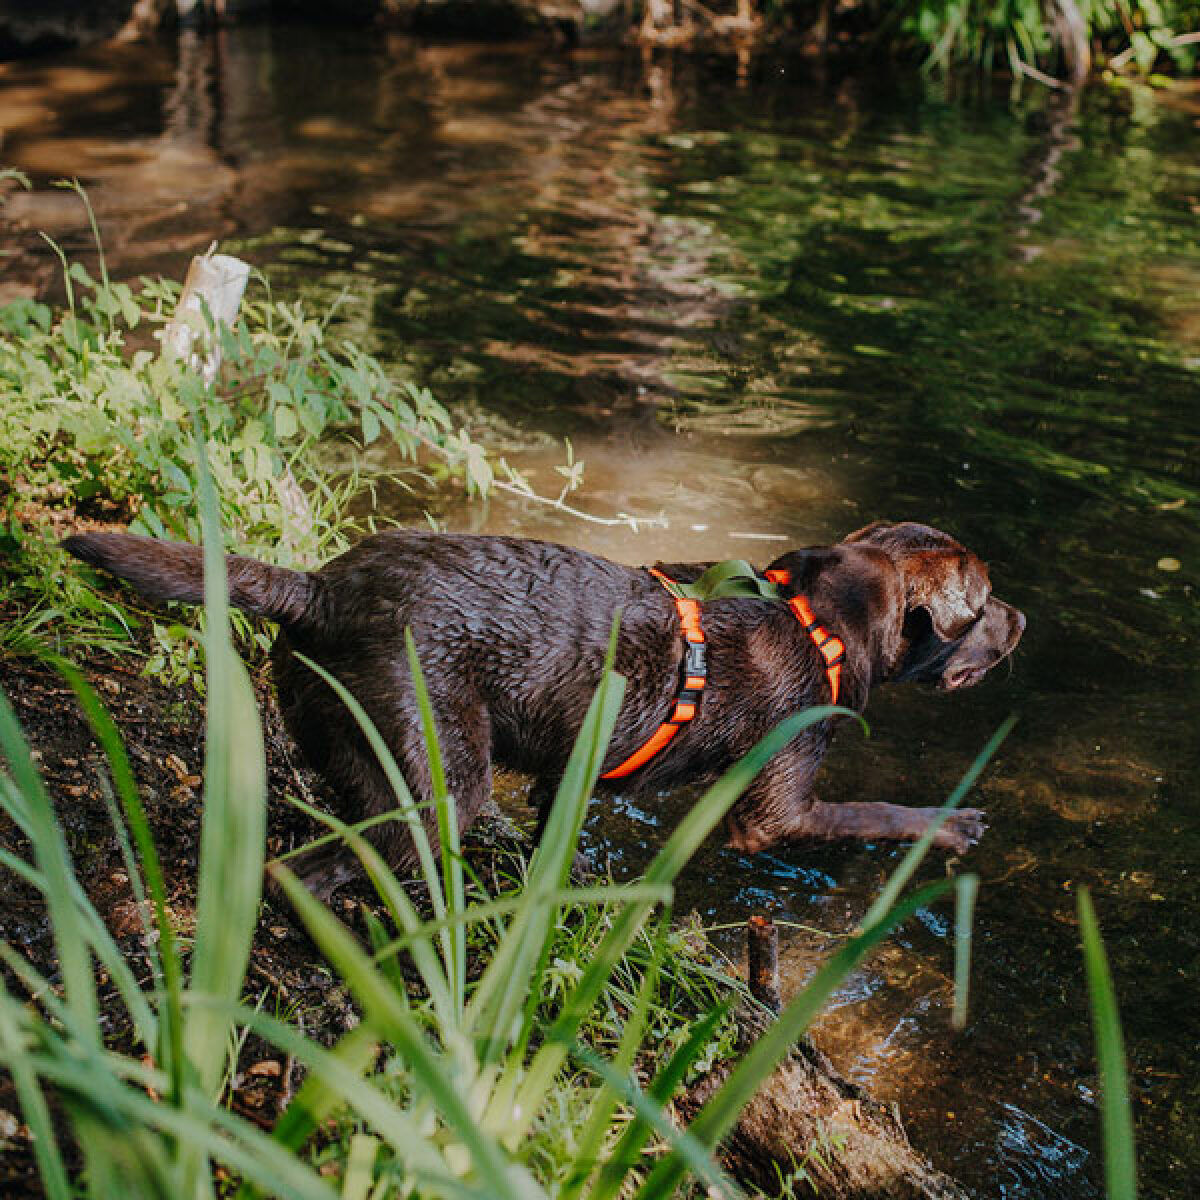 Dog in the water with Outdoor FLEX lead harness is 5-way adjustable in neon orange/green